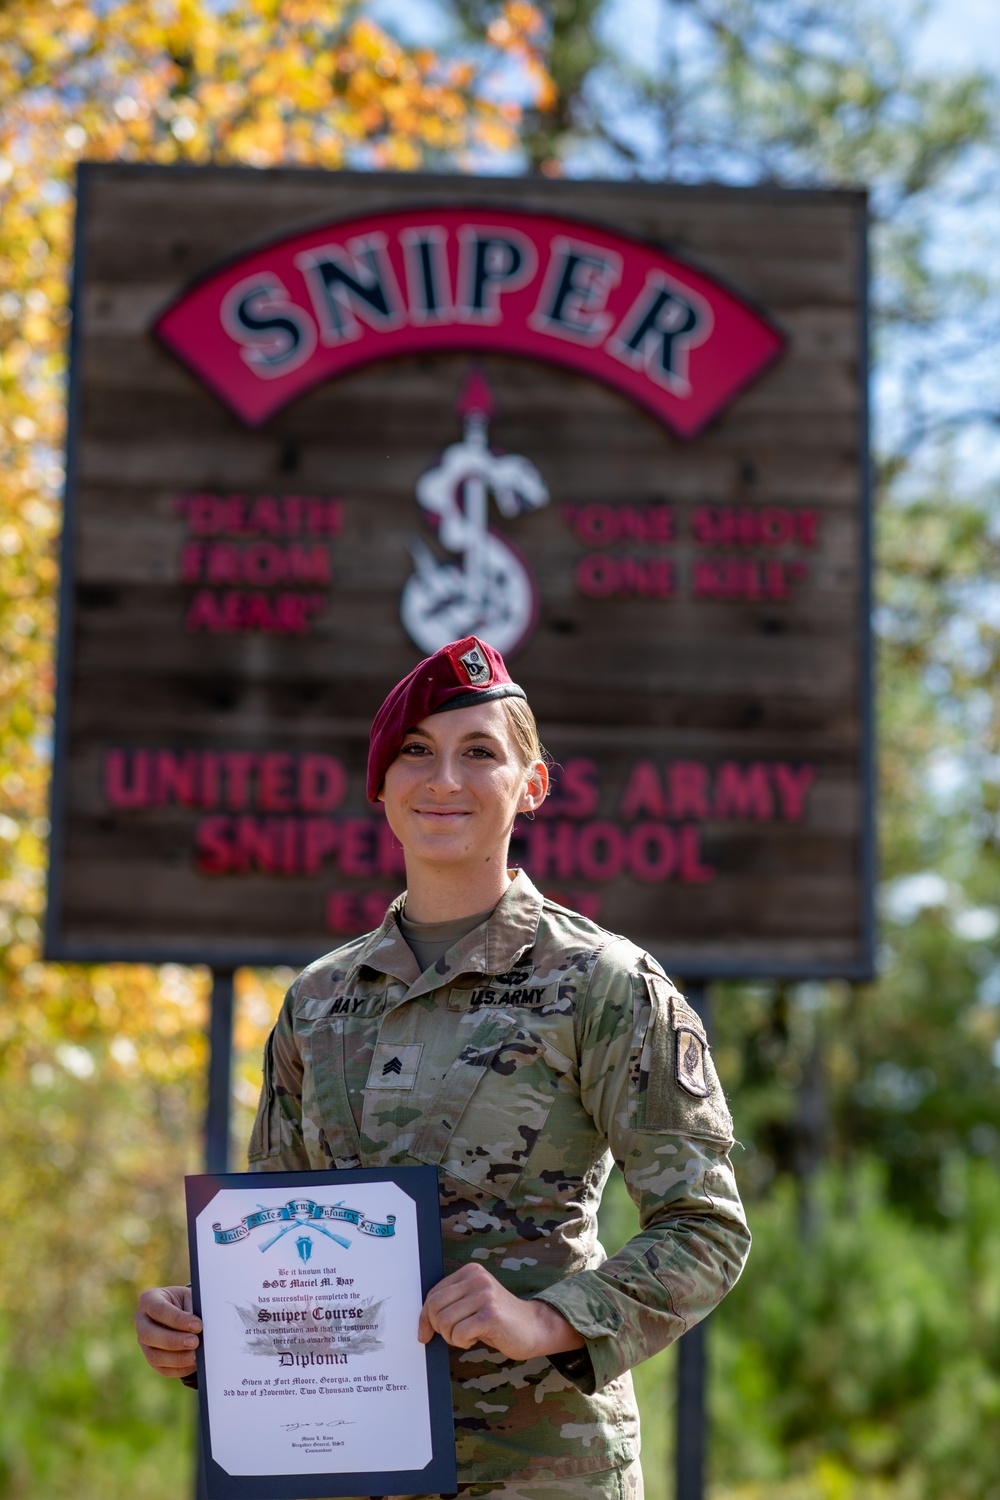 Sky Soldier makes history as first active duty female Army sniper